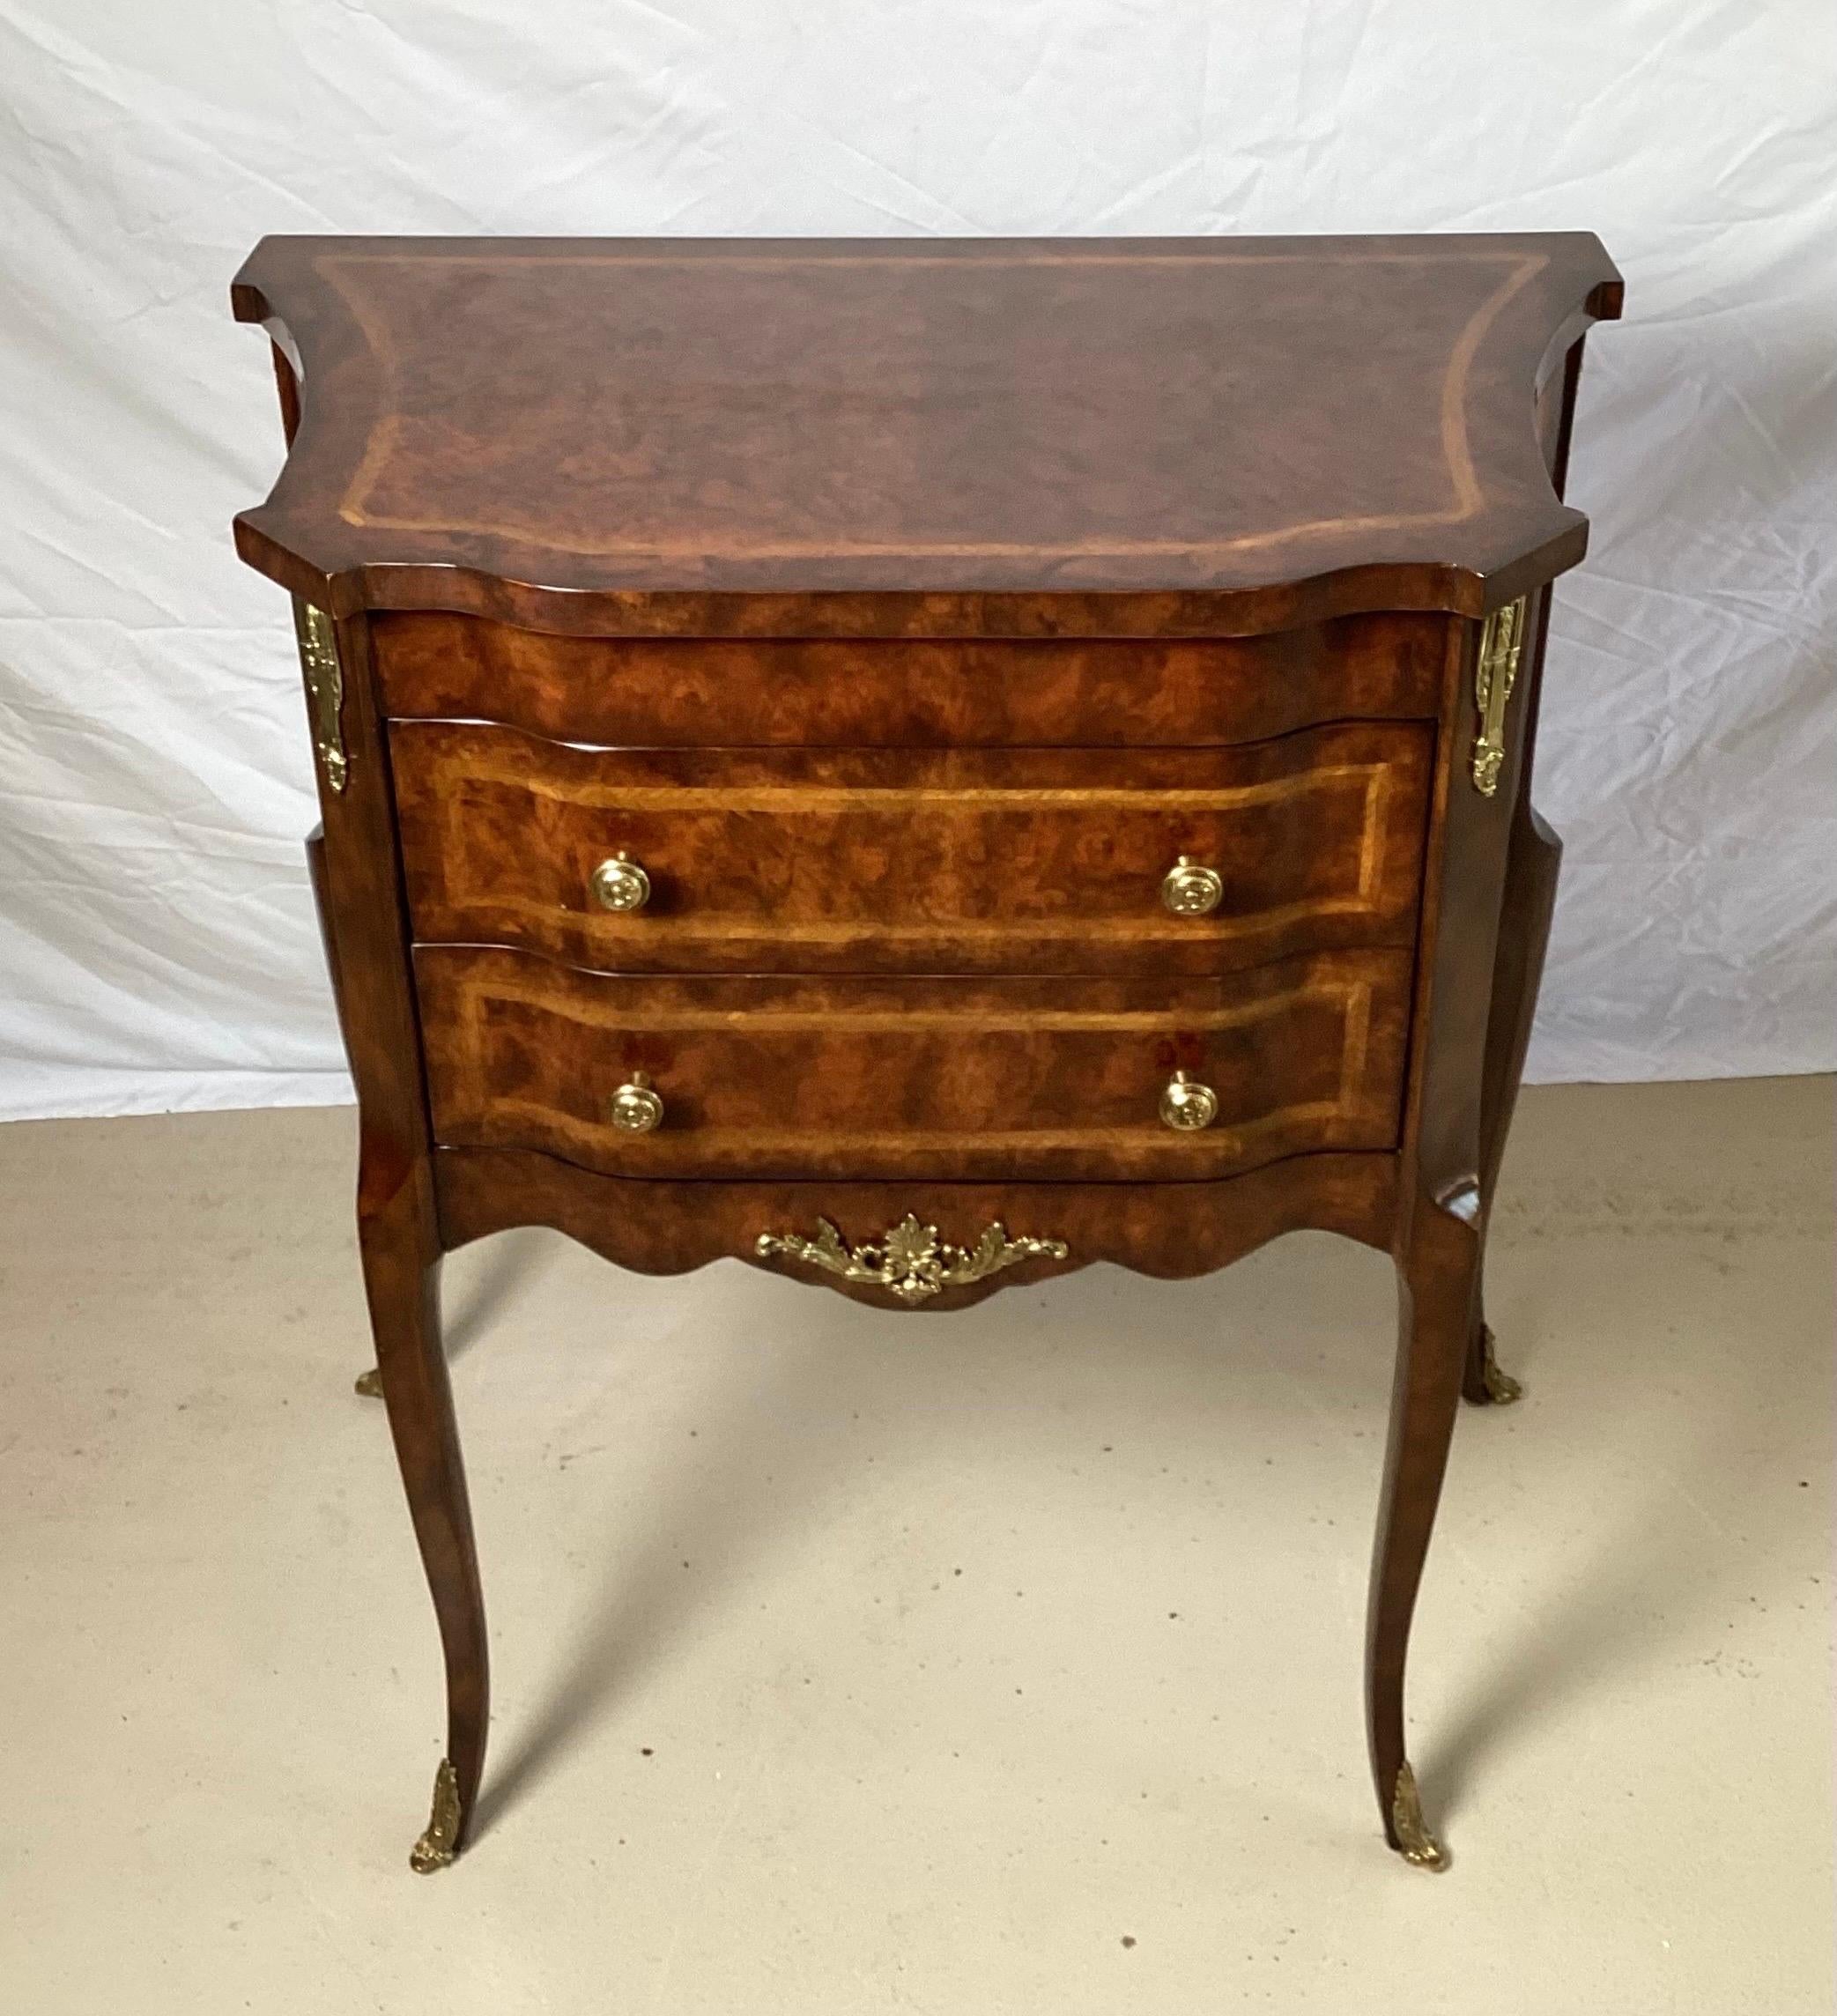 A diminutive two drawer Napoleon III style commode by Maitland Smith. The warm burl walnut with crass banded inlay with ormolu mounts. Shapely front with curved sides with gently curved and flared legs.